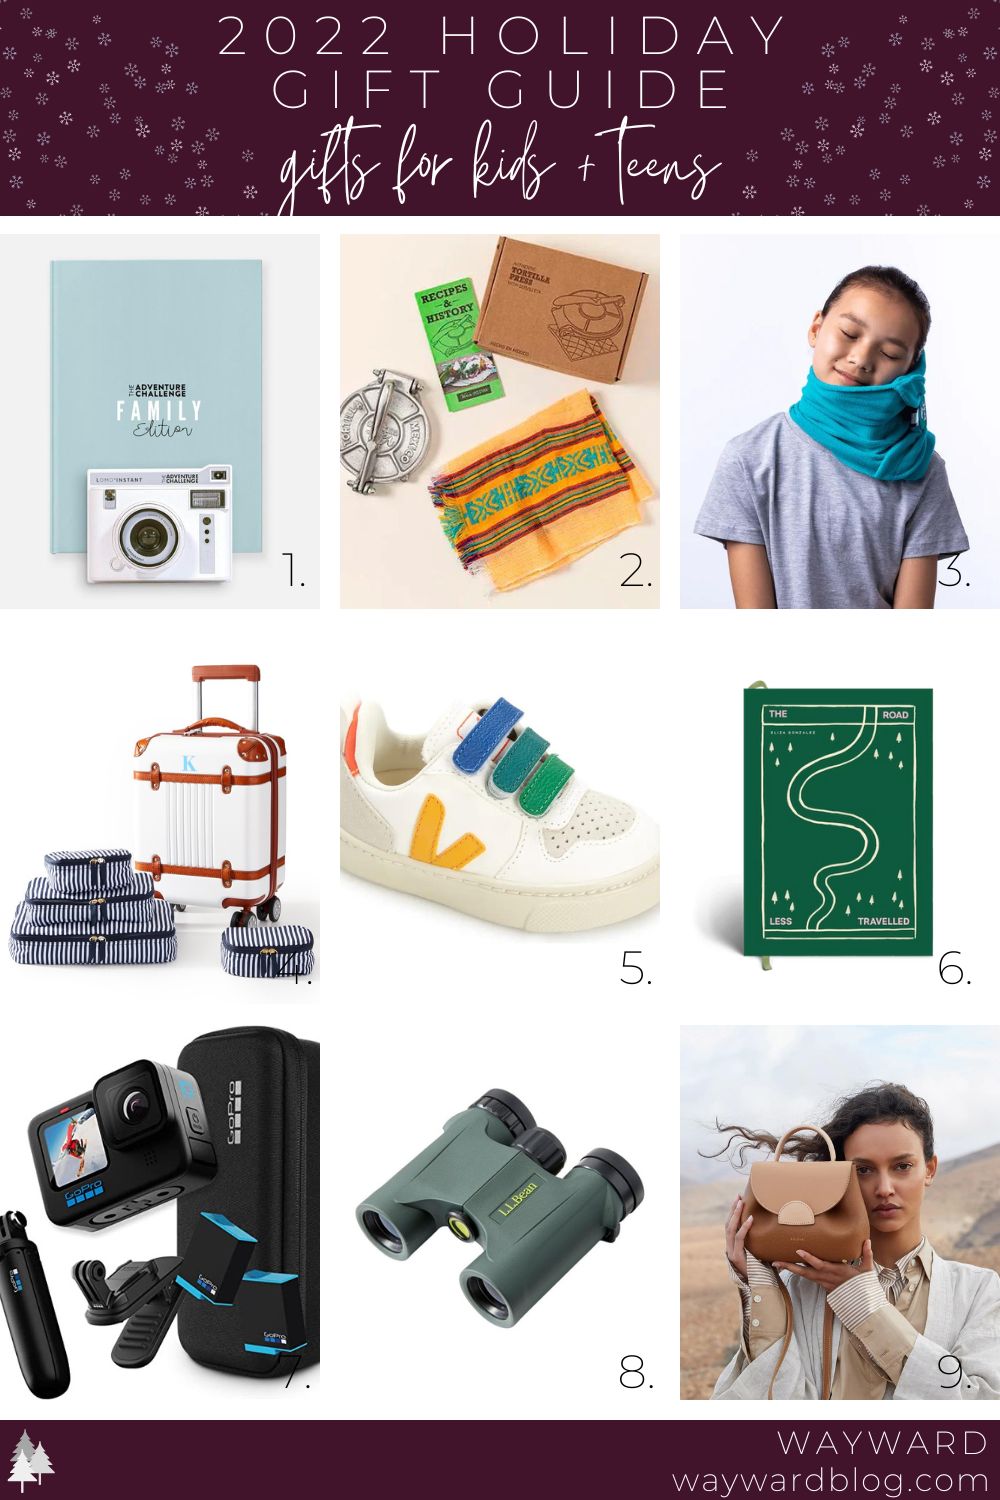 Collage of images in the gifts for kids and teens gift guide